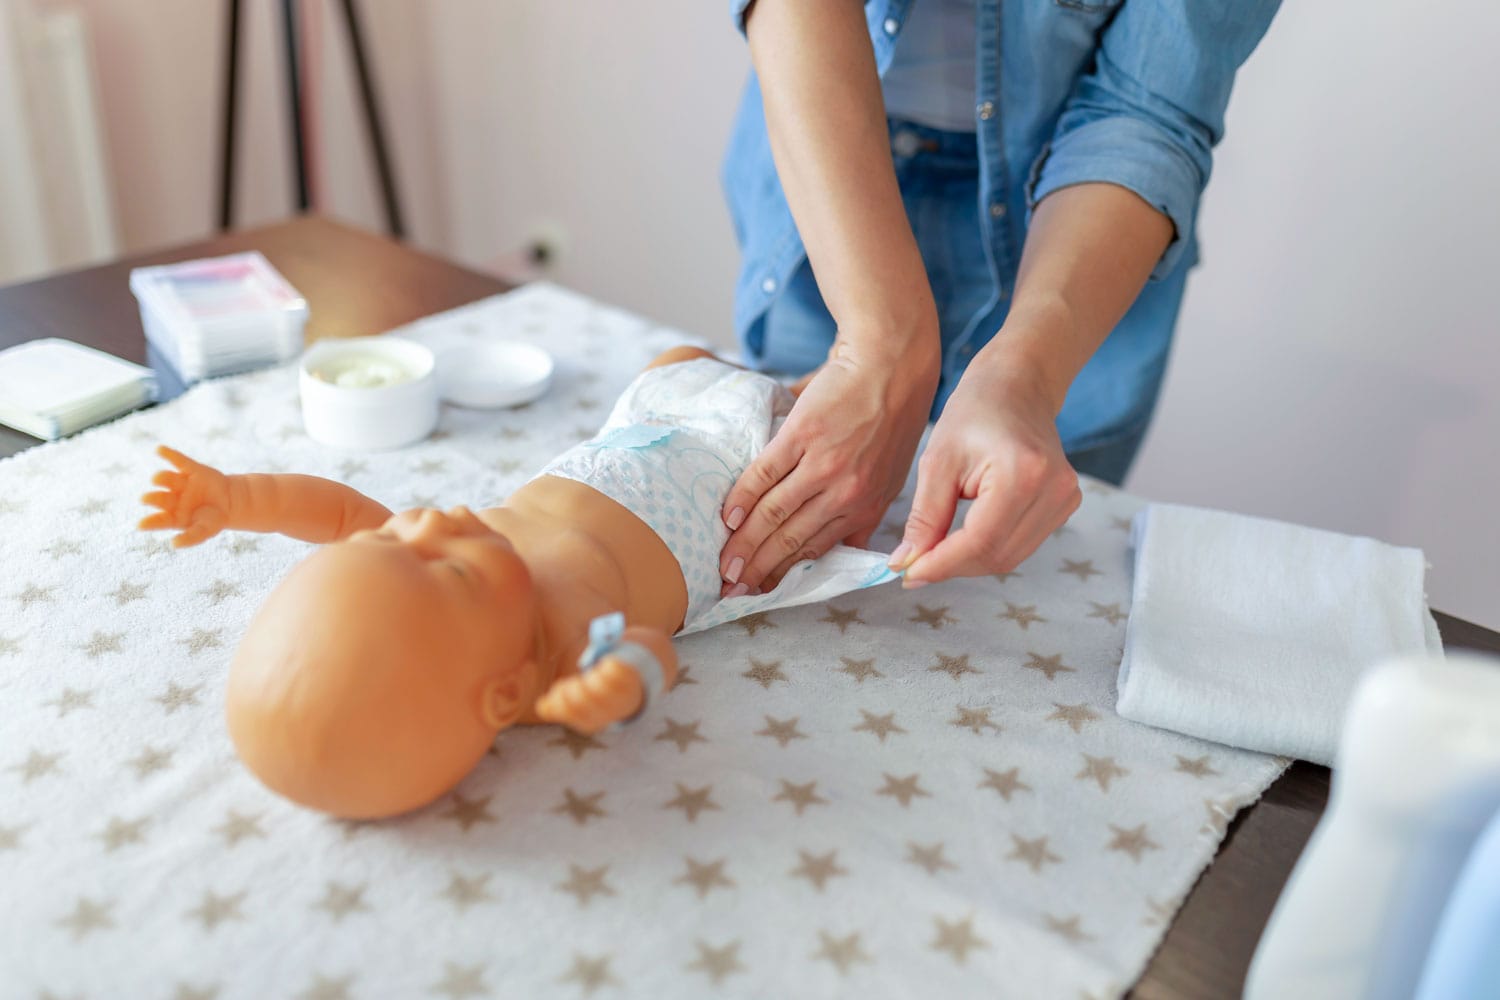 A hands-on demonstration of infant care during a Newborn Care Consultation with Beata.